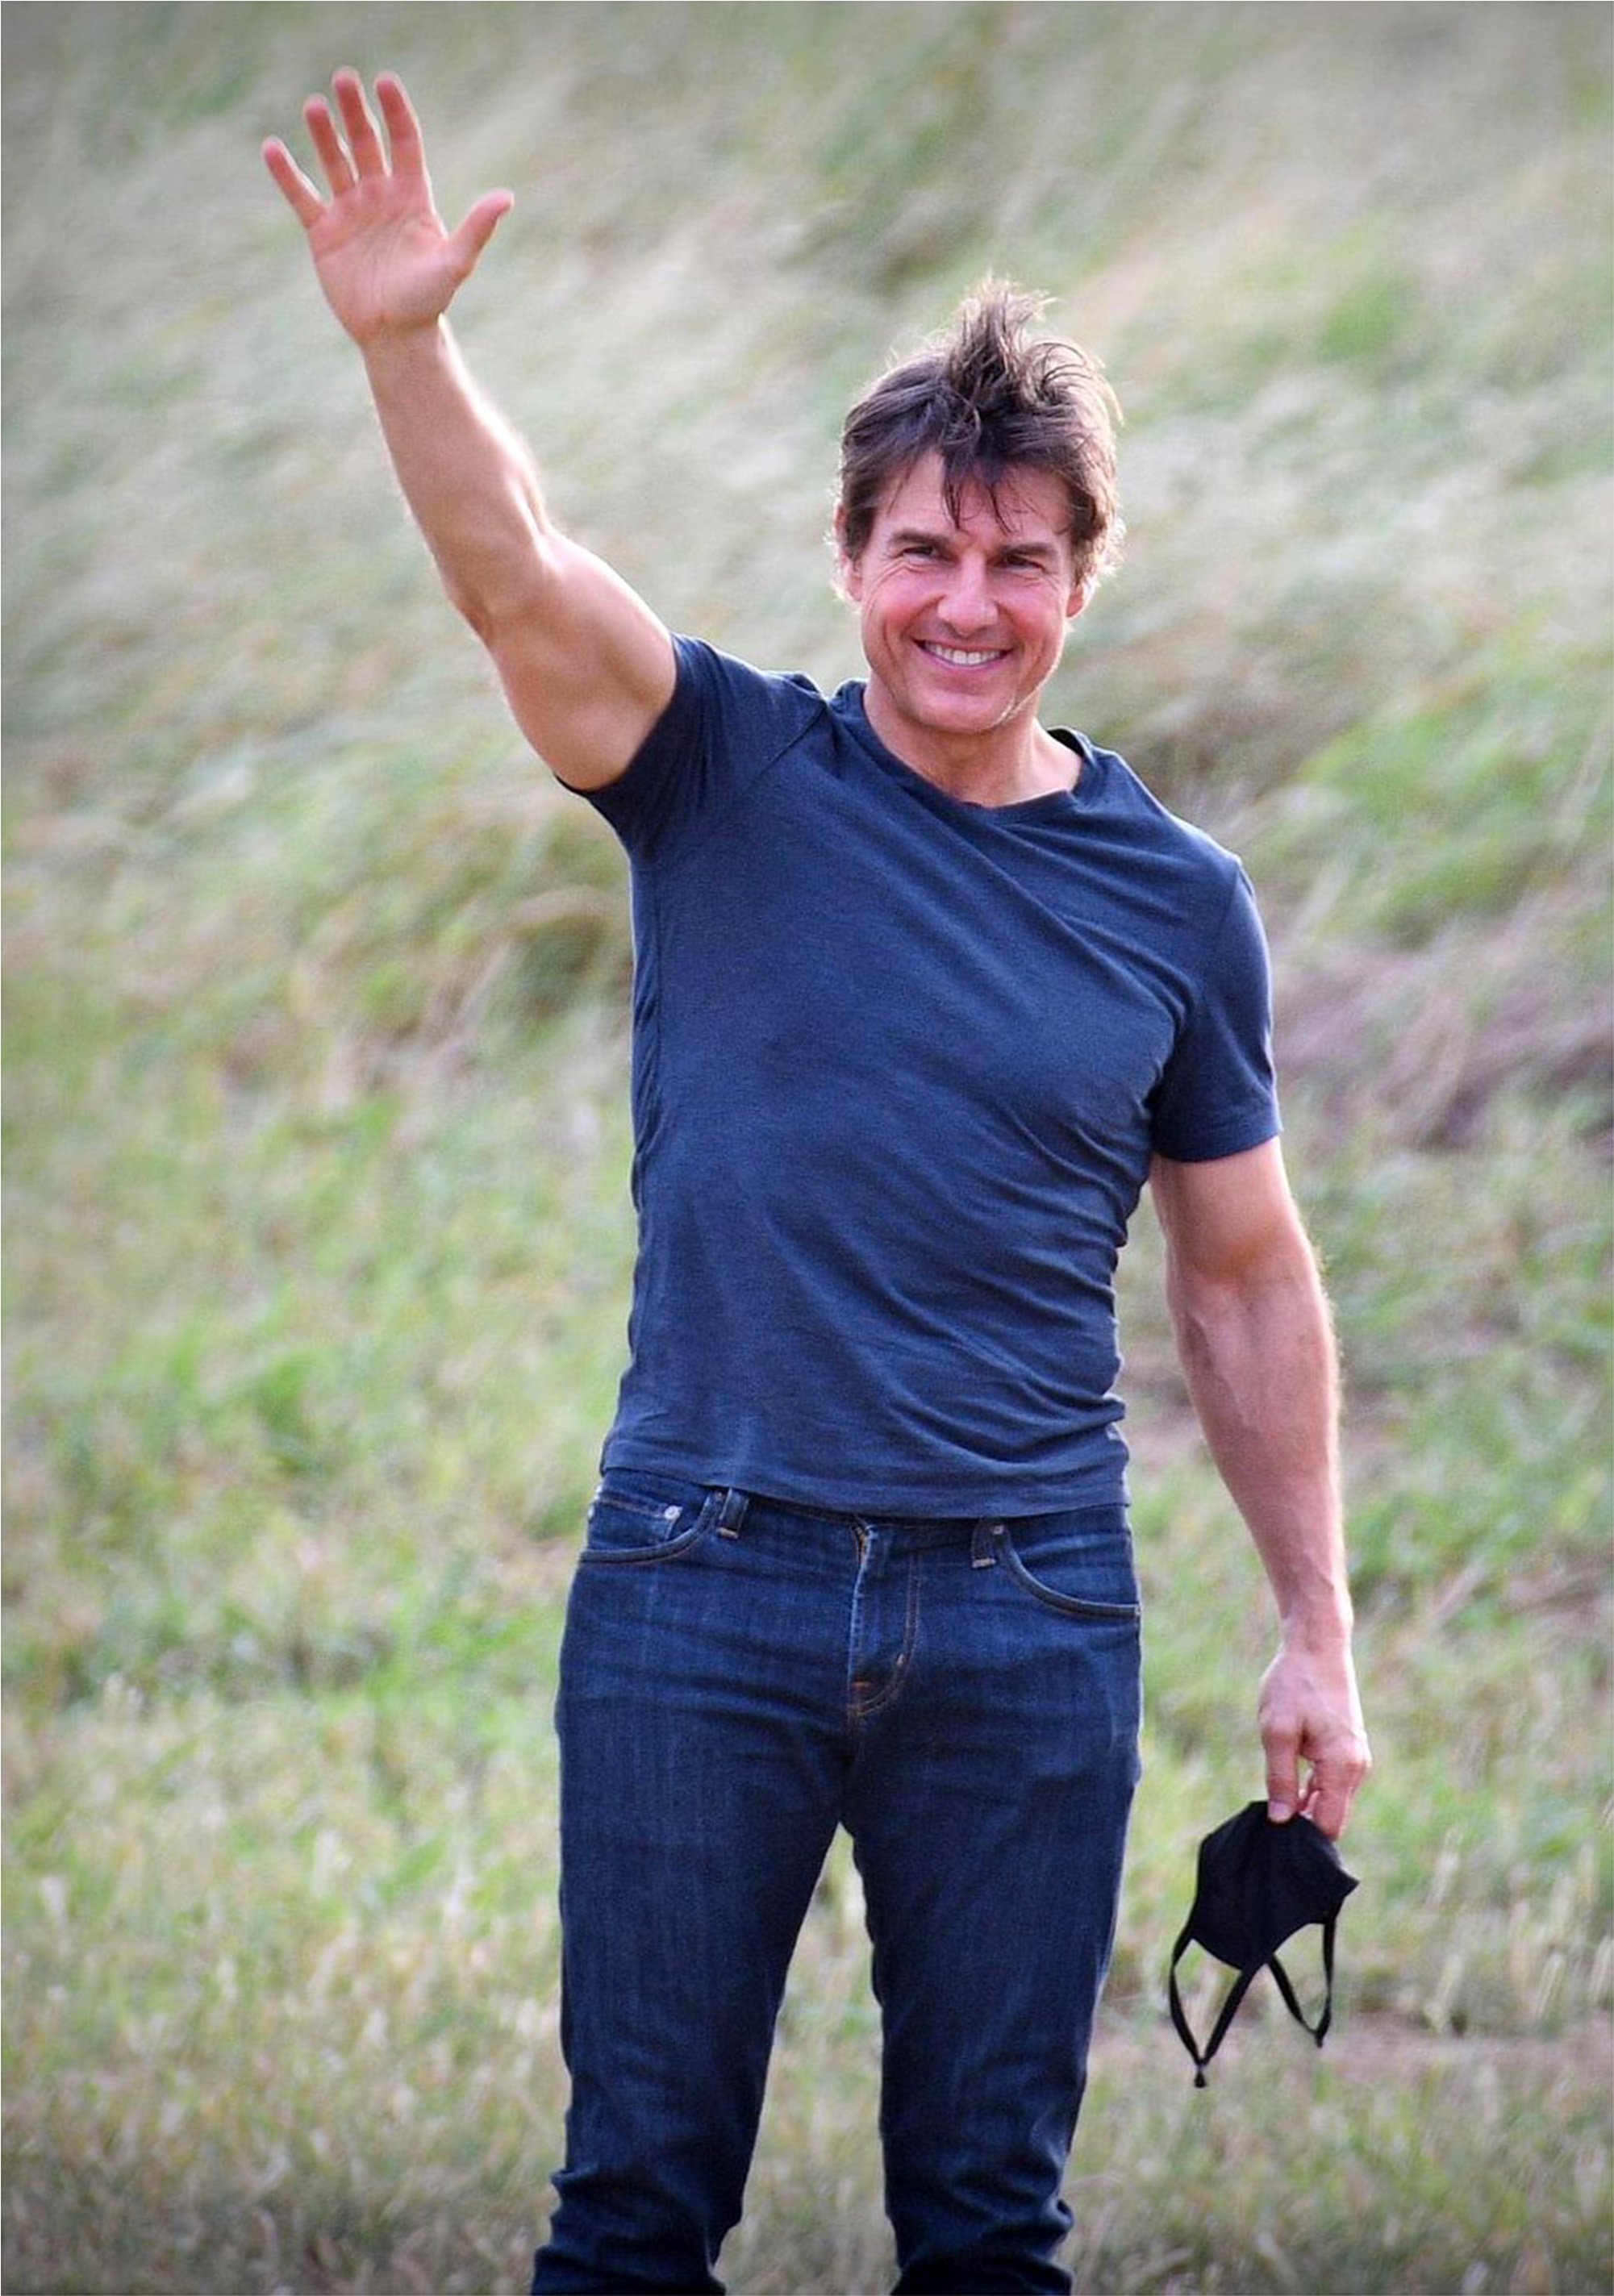 Tom Cruise lands chopper filming 'Mission Impossible'